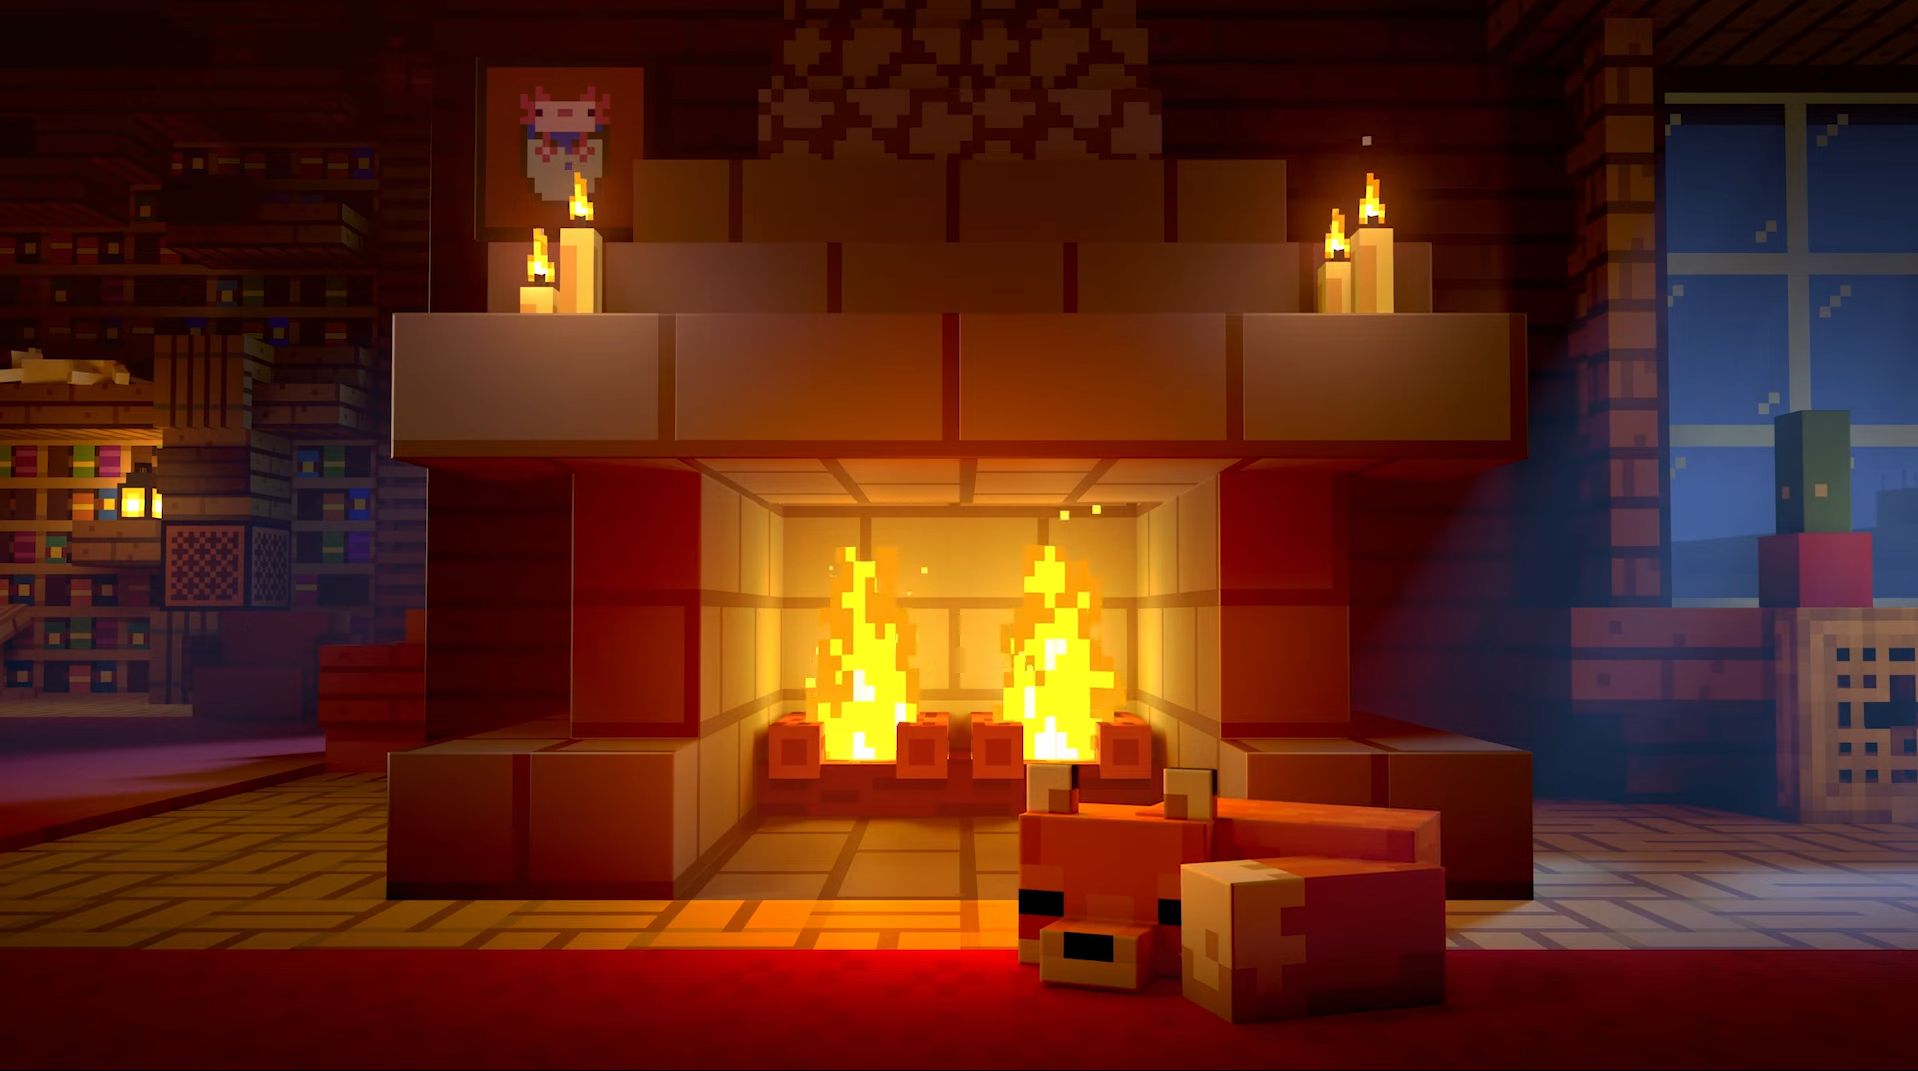 A fox curled up by a fireplace in a warm house in Minecraft.